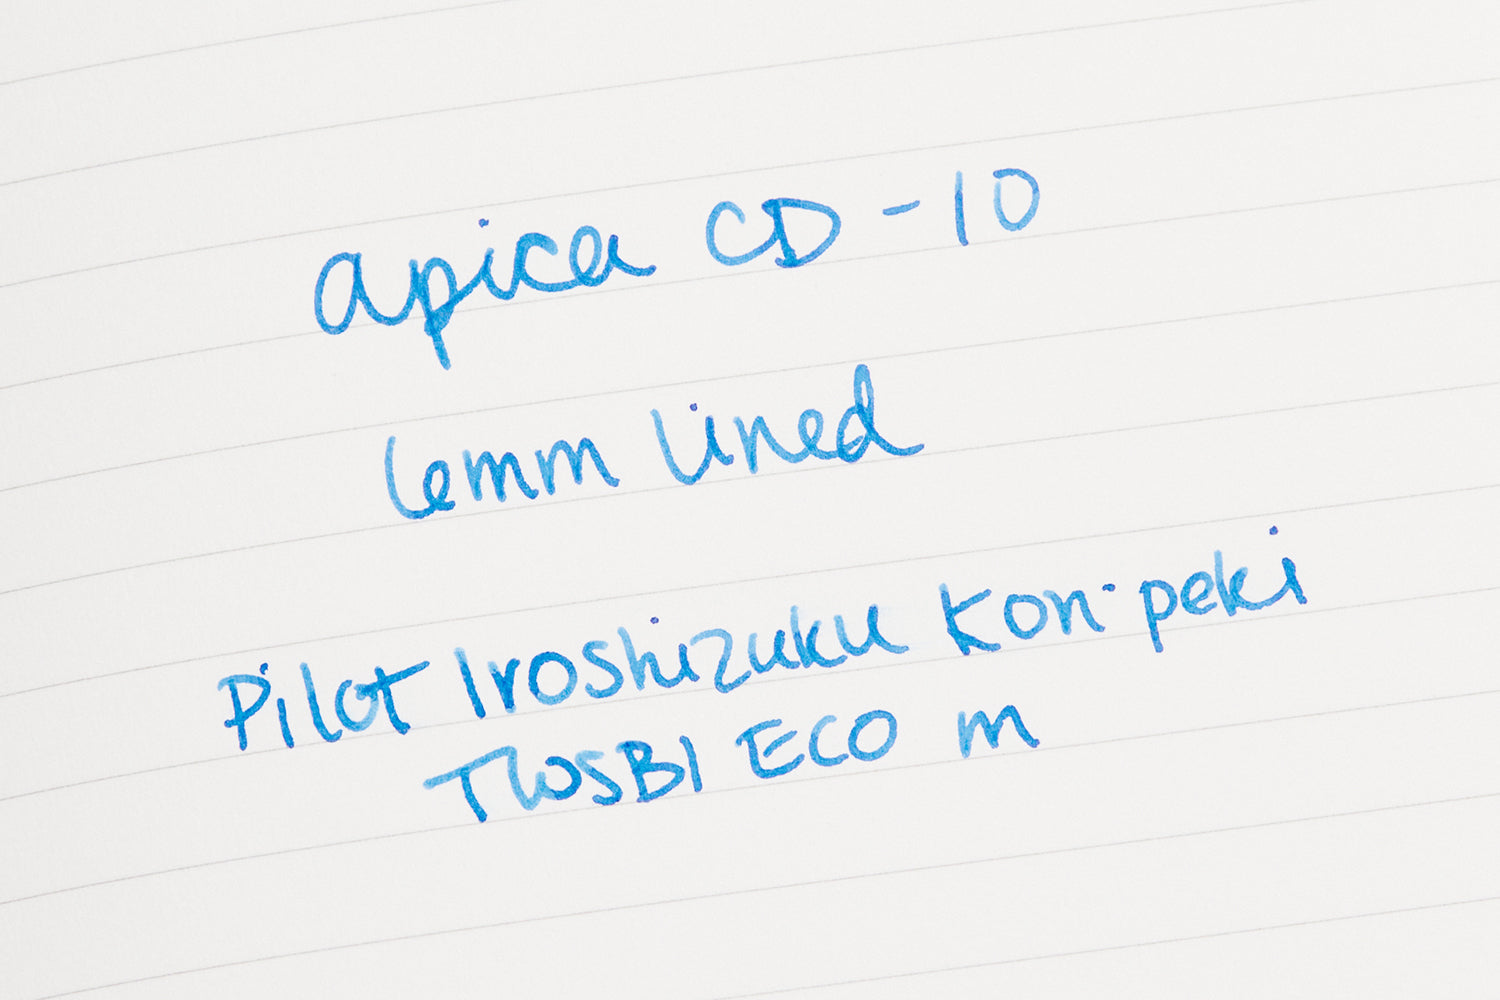 Writing sample in an Apica CD-10 lined notebook